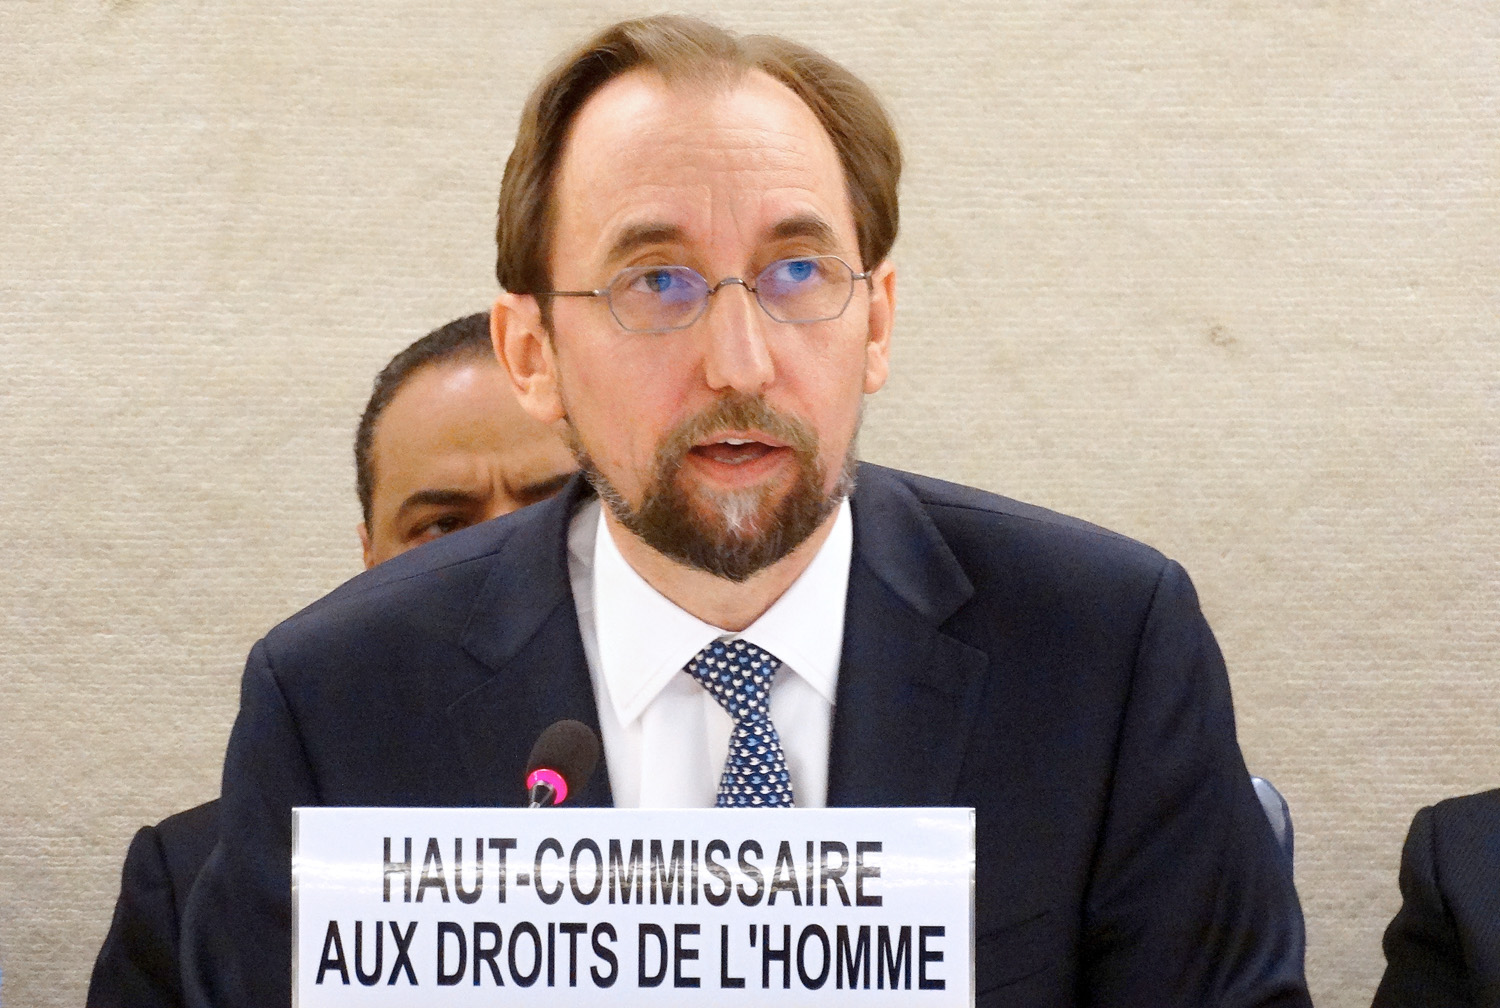 The UN High Commissioner for Human Rights Zeid Ra'ad Al Hussein